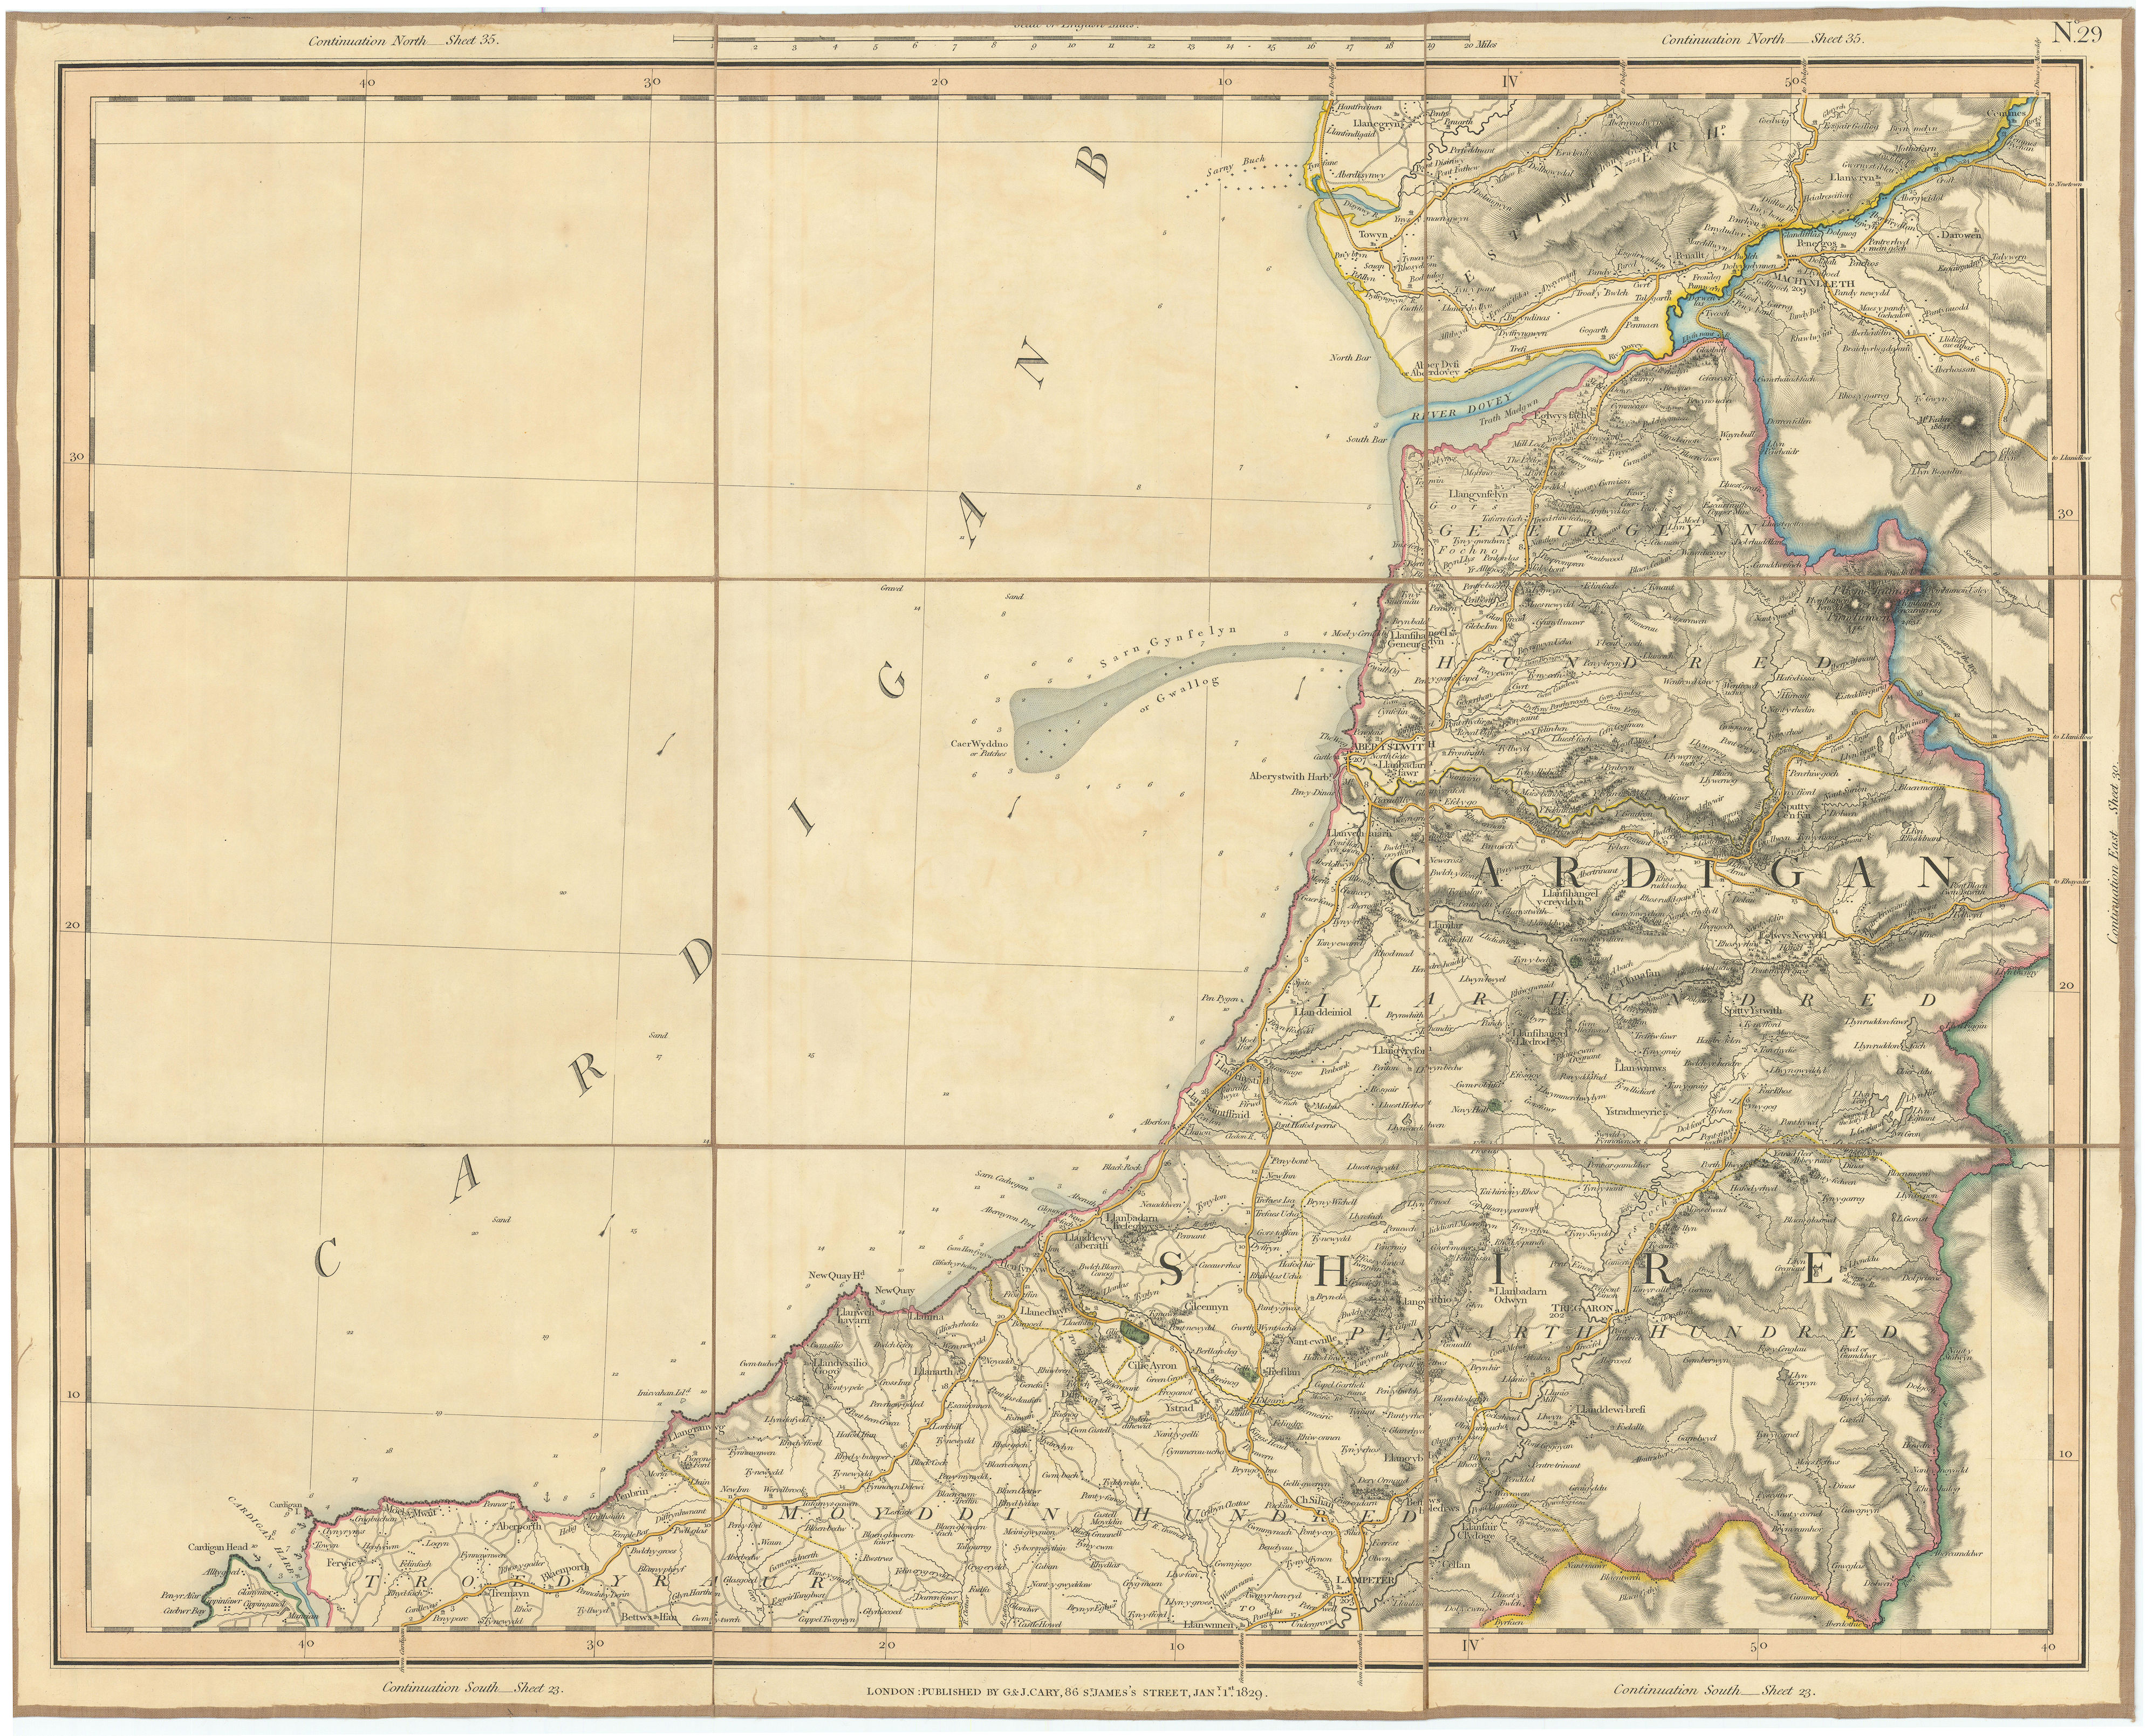 Associate Product CARDIGAN BAY. Cardiganshire, South Merionethshire. River Dyfi. CARY 1832 map